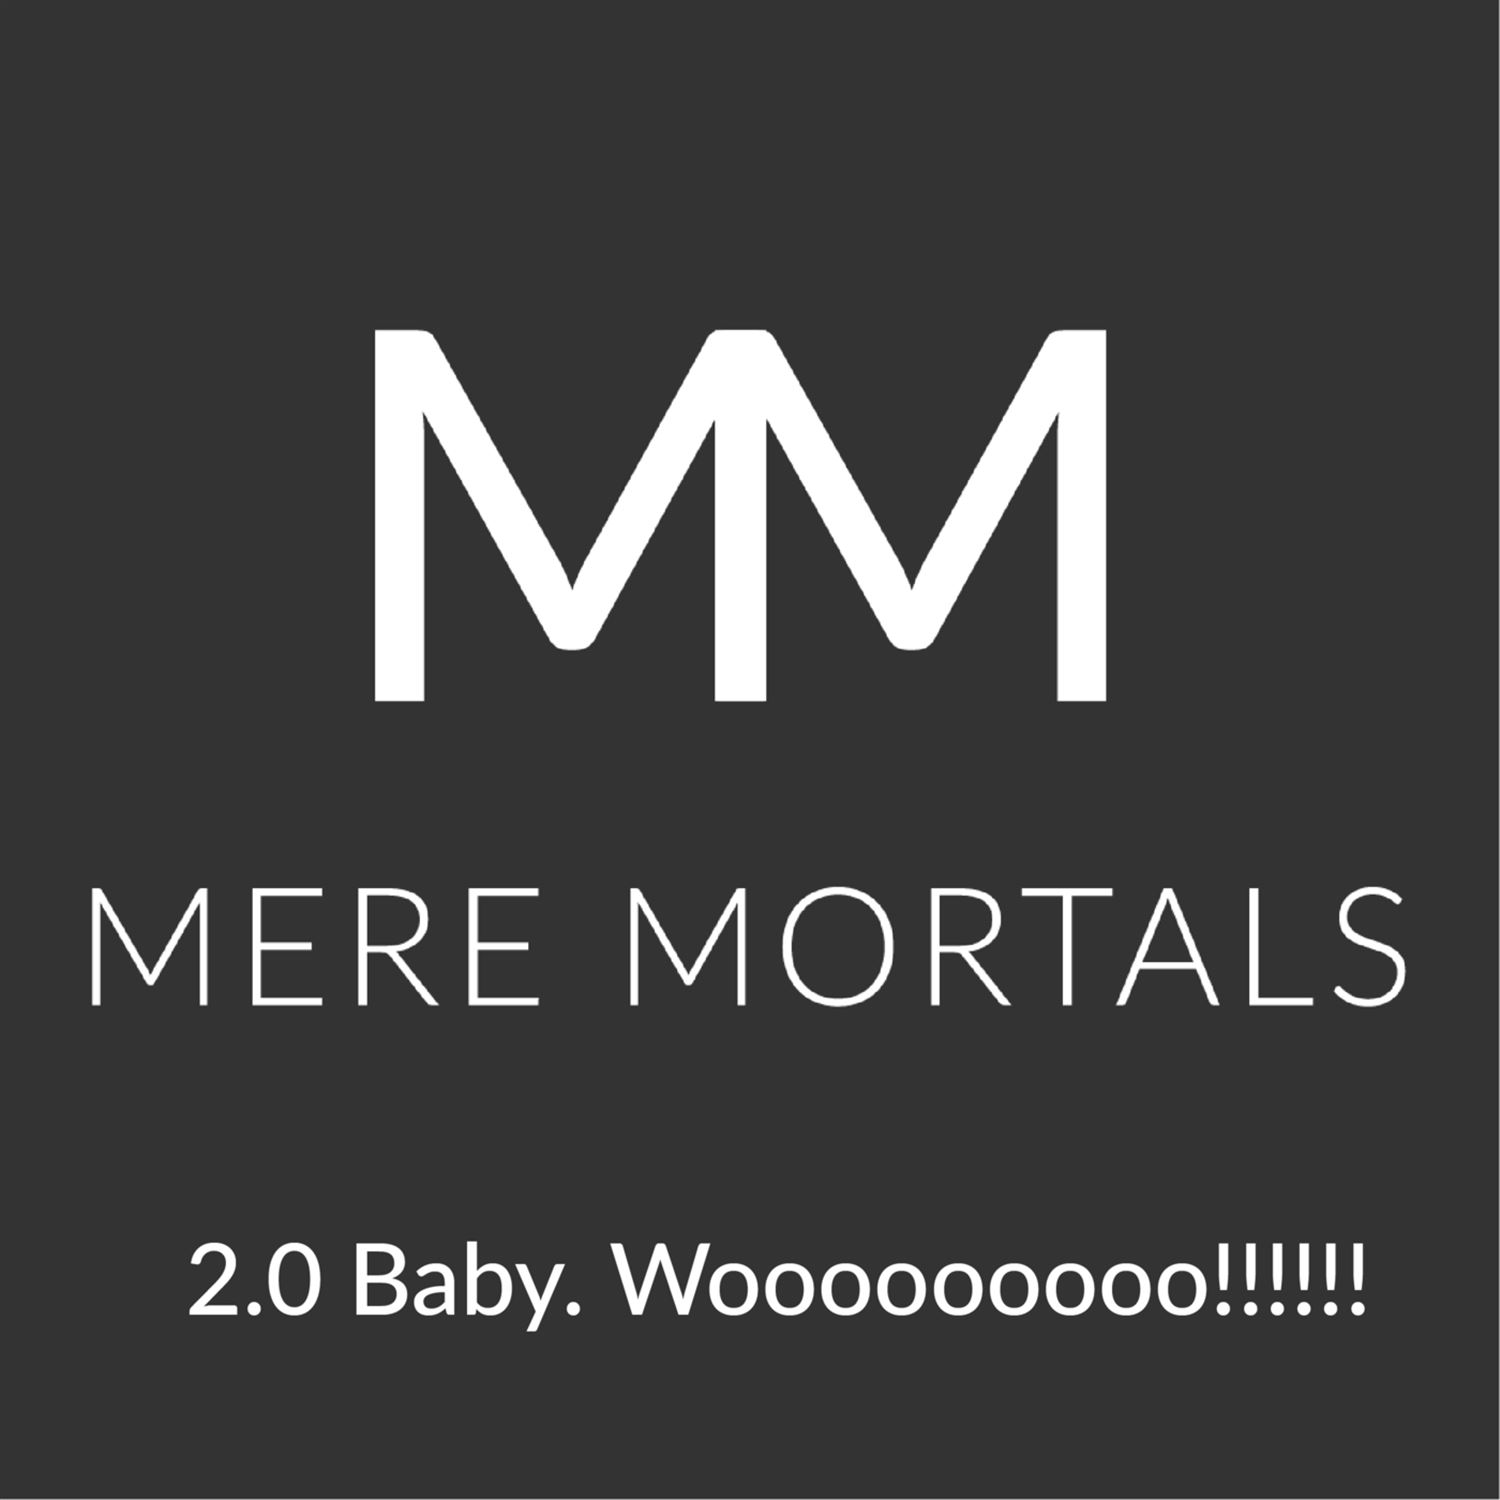 Mere Mortals 2.0, we're committed!!!